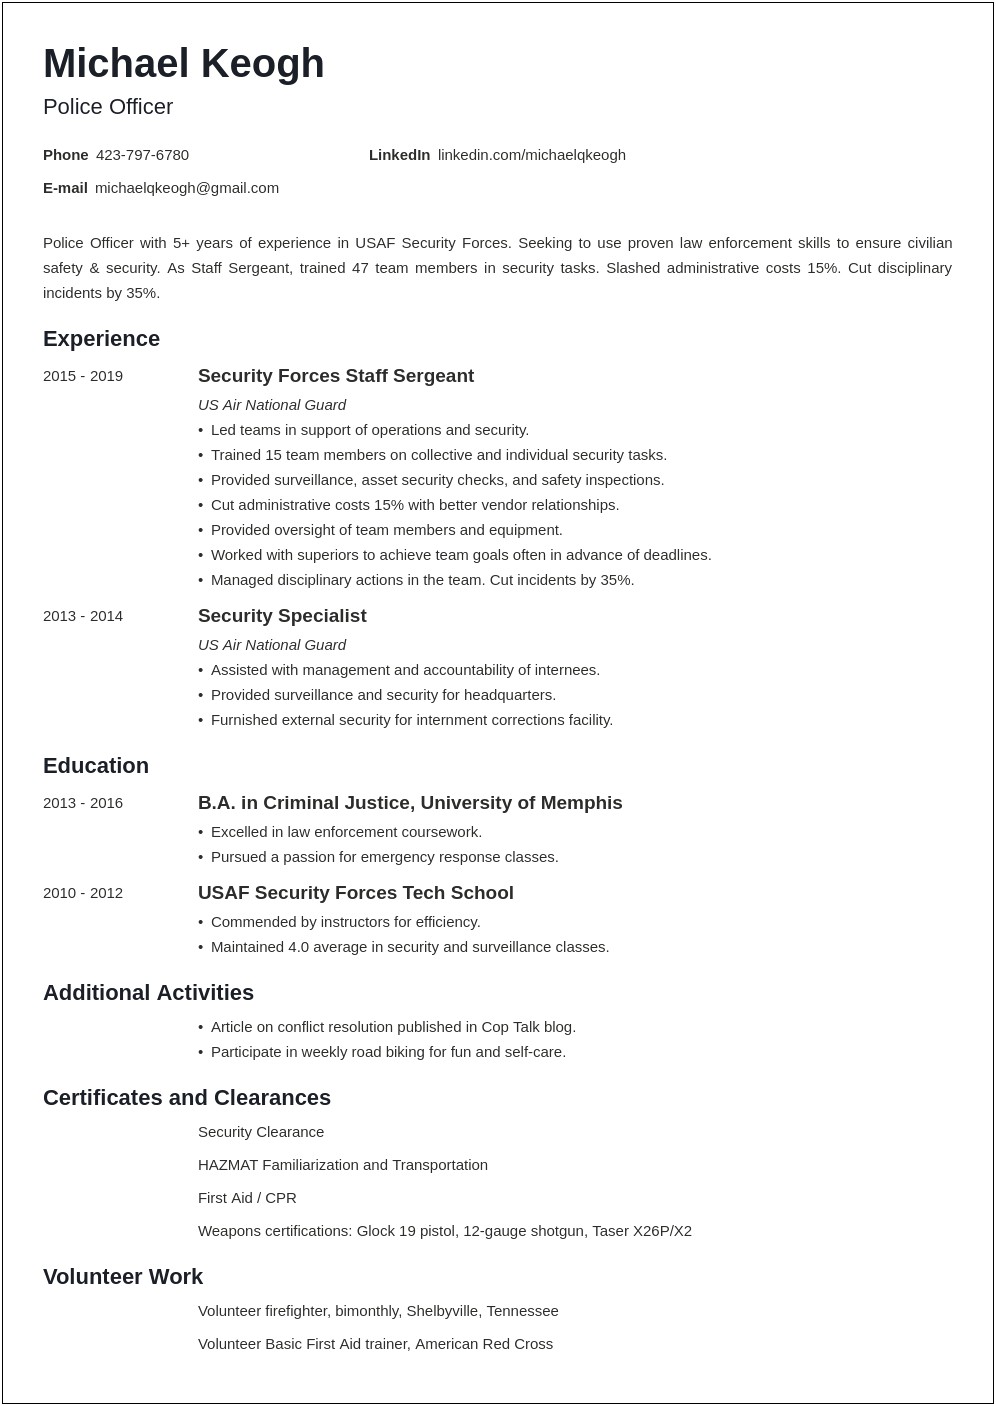 Example Resume For Criminal Justice Major